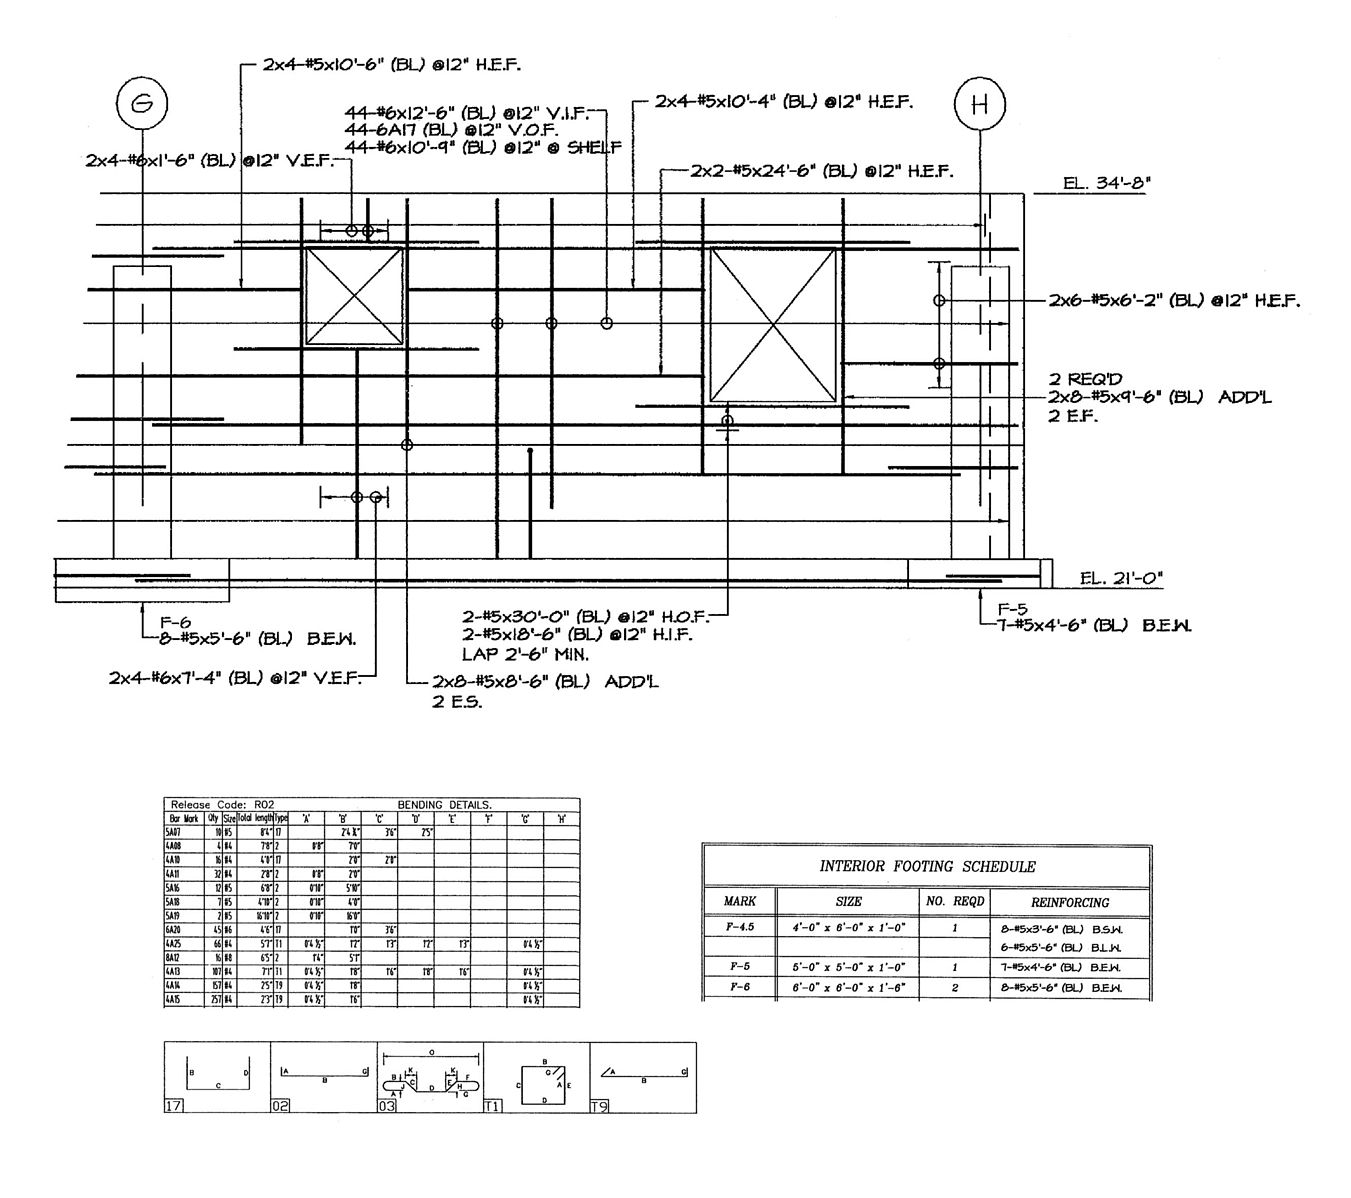 Example shop drawing, credit Stephen Shay, wikimedia commons 